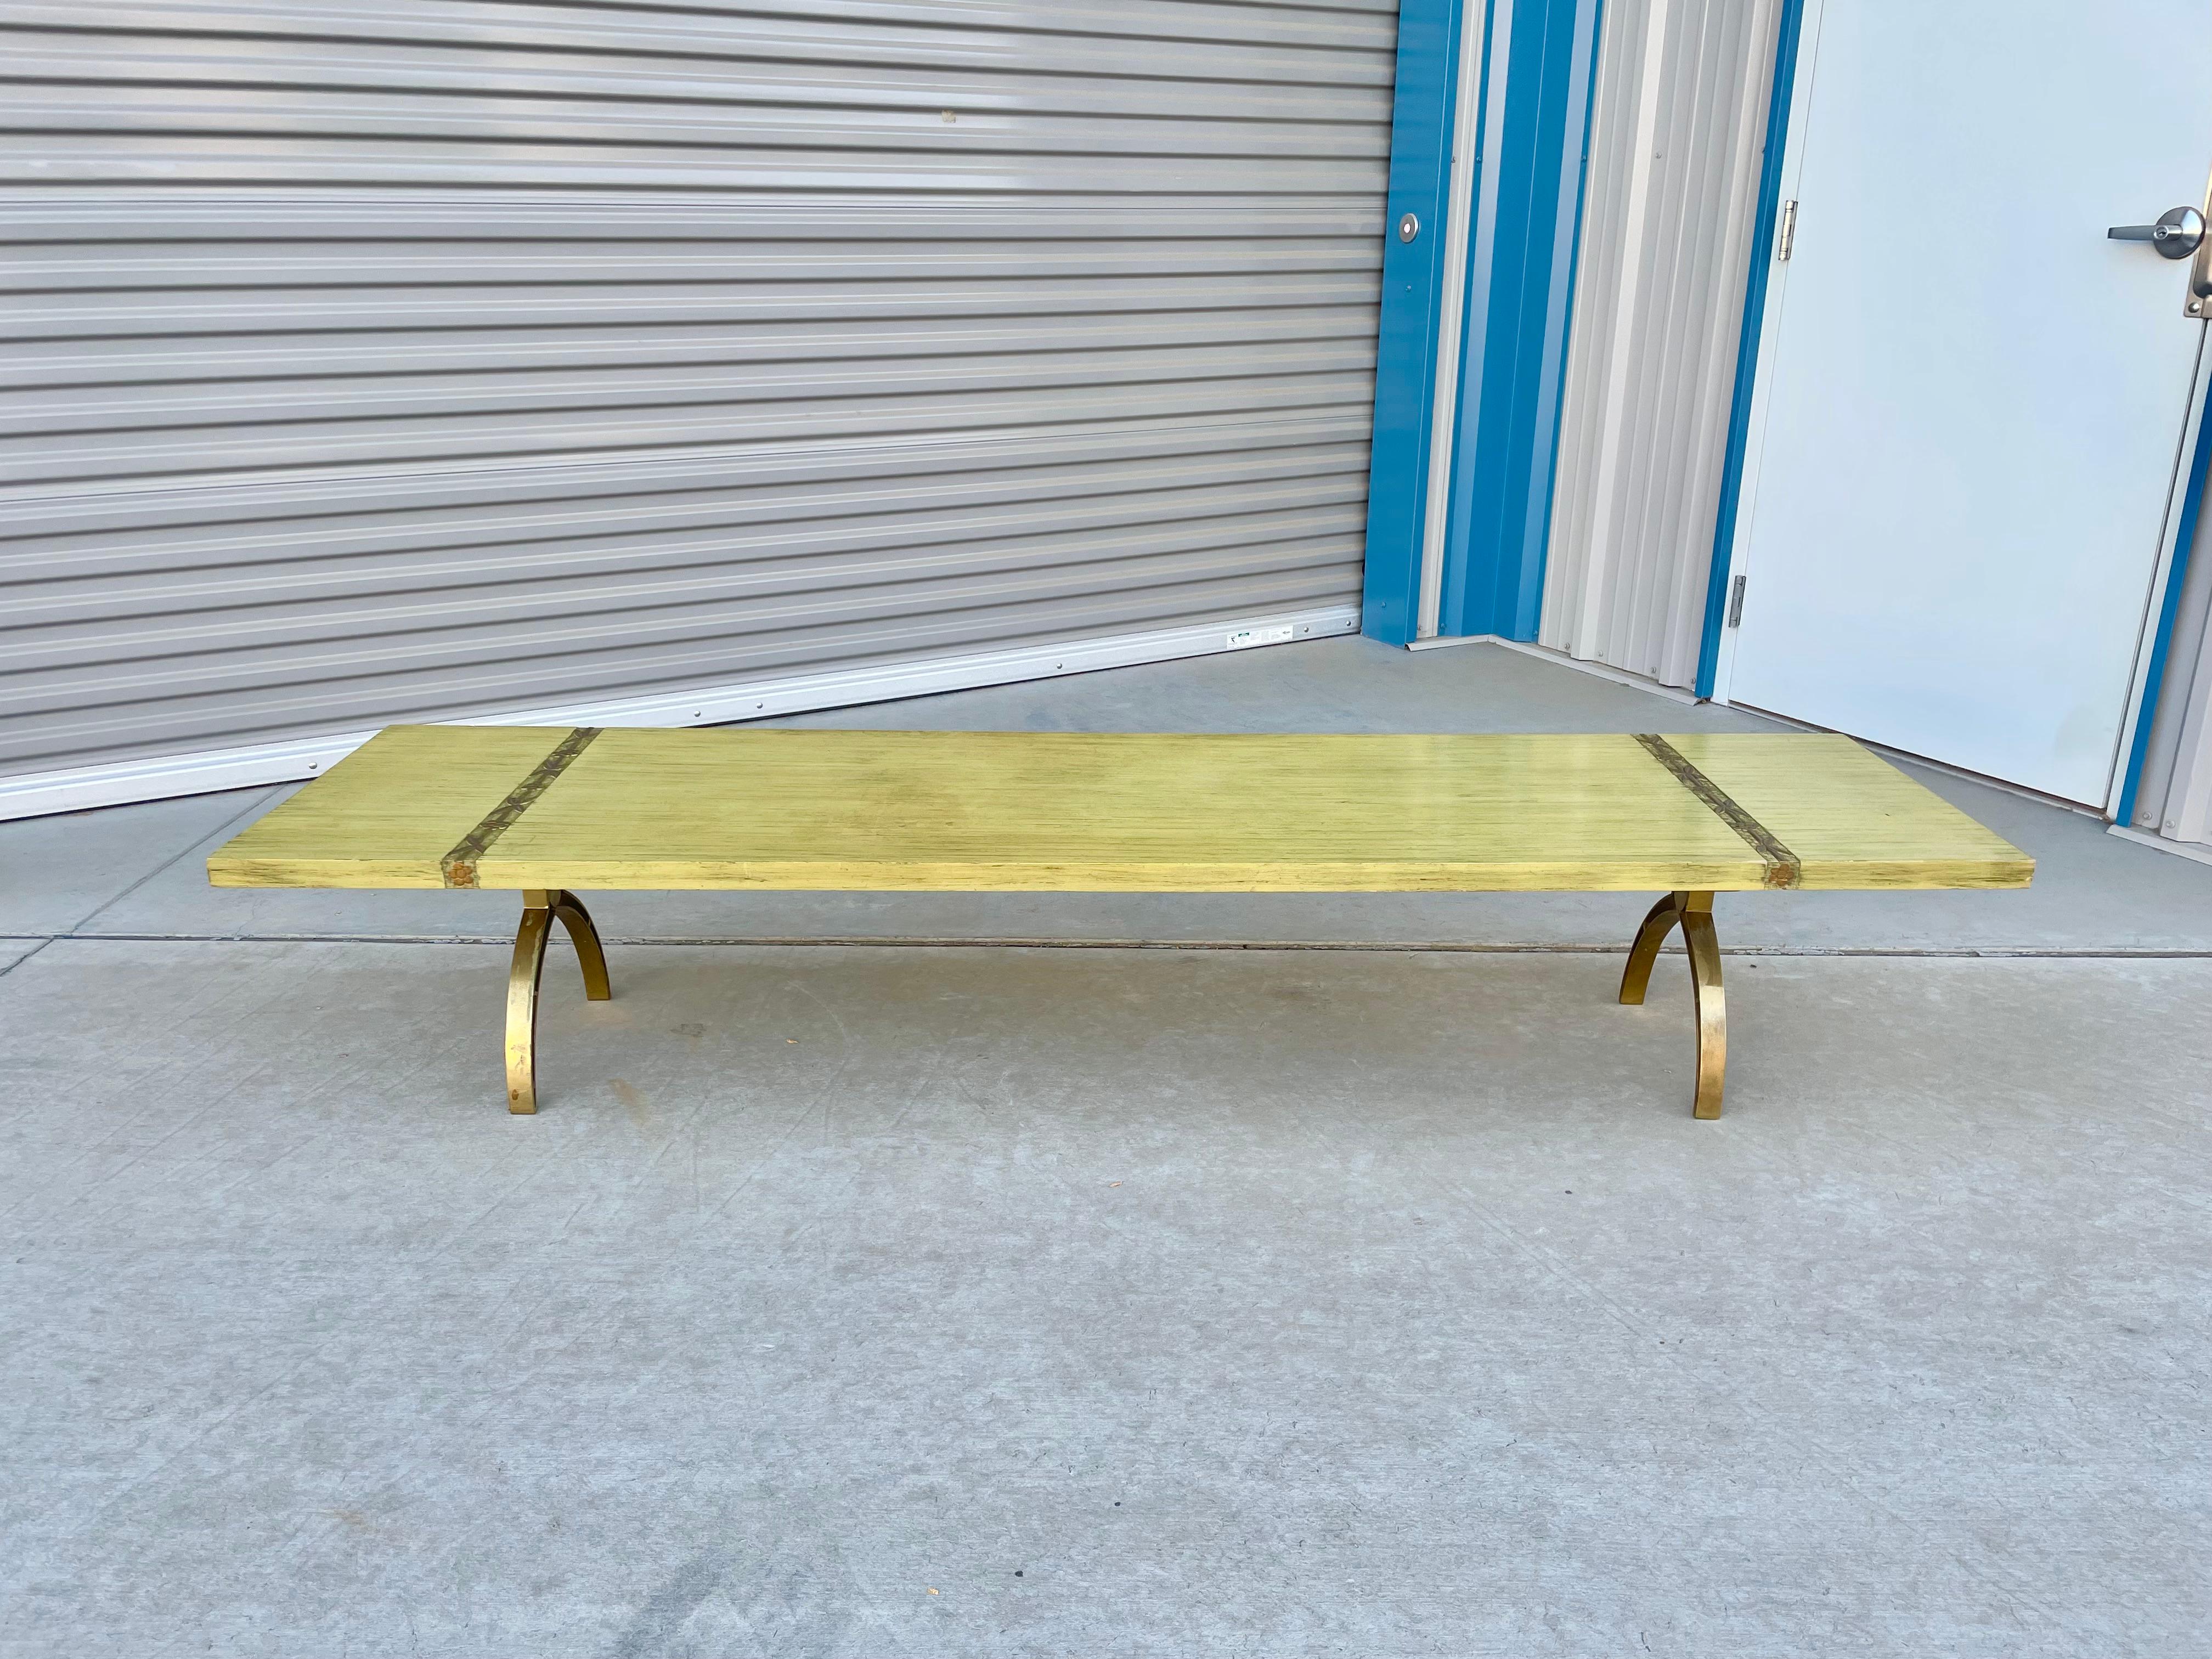 Vintage brass coffee table designed and manufactured in the United States circa 1970s. This beautiful mid-century rectangle coffee table features a wood top with a unique brass leg base design, guaranteed to draw everyone's attention in your next